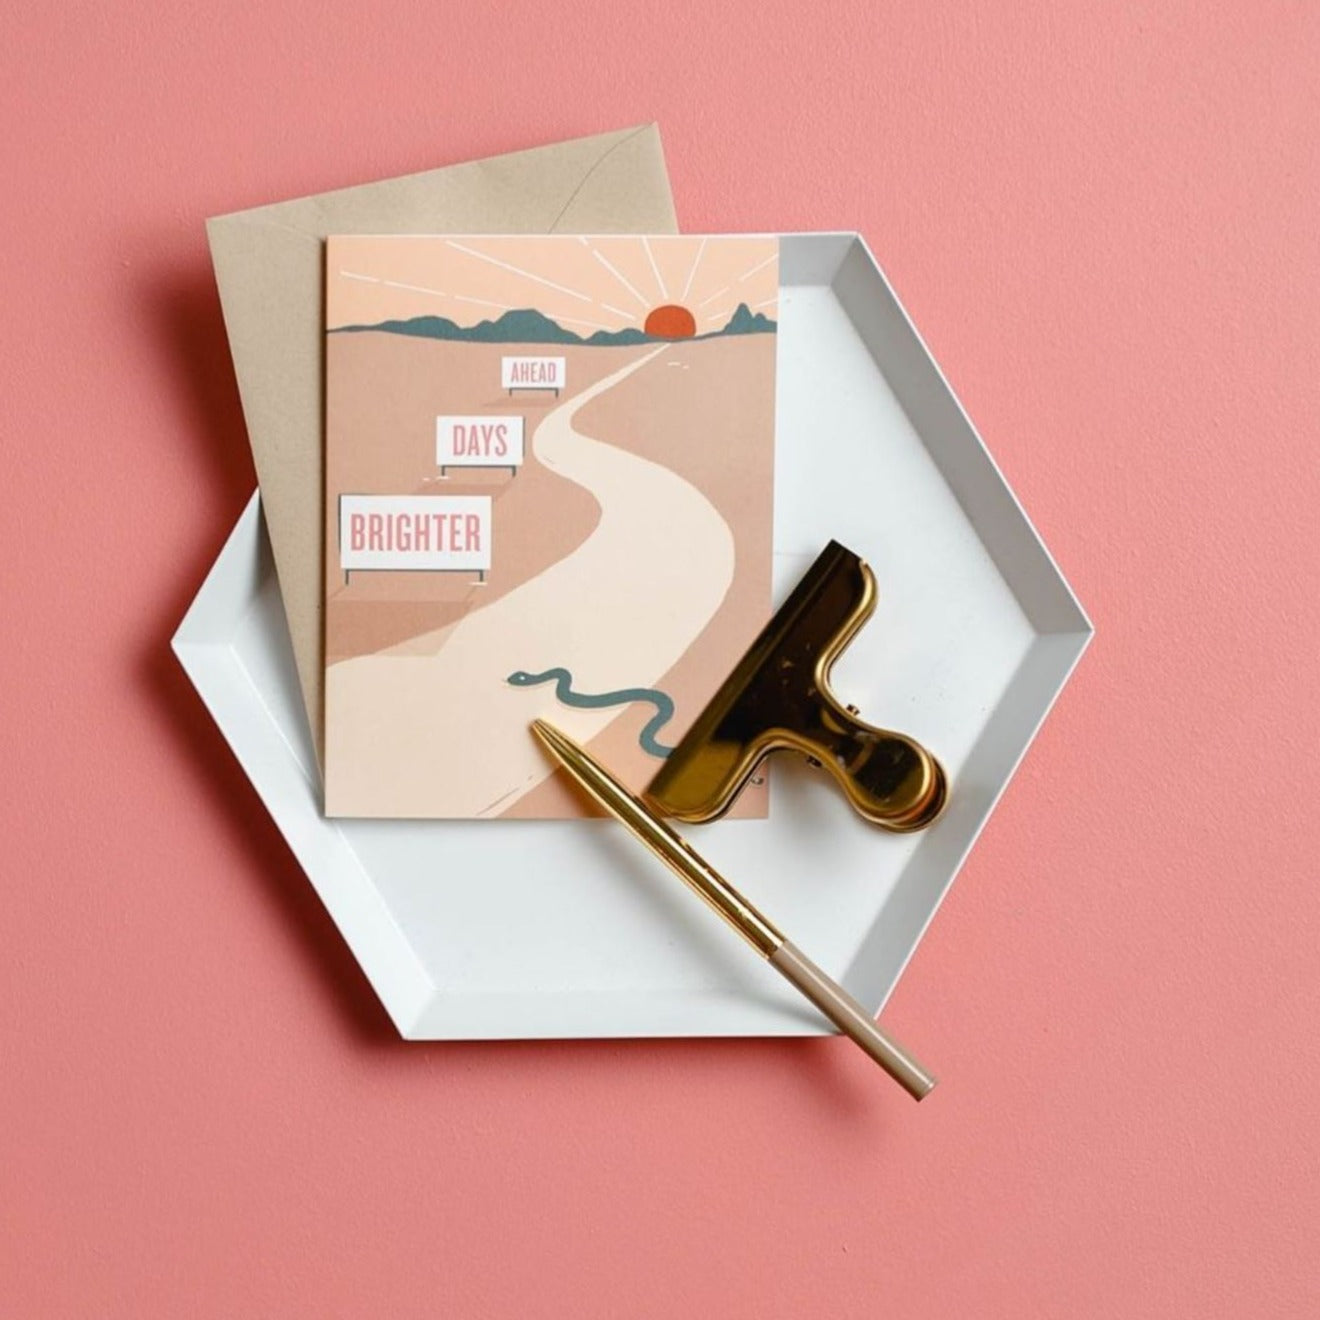 Illustrated encouragement card on premium warm white cardstock, featuring a desert scene with a snake and a setting sun, accompanied by the words 'Brighter Days Ahead. The card is sitting in a white tray on a pink piece of paper in the background.